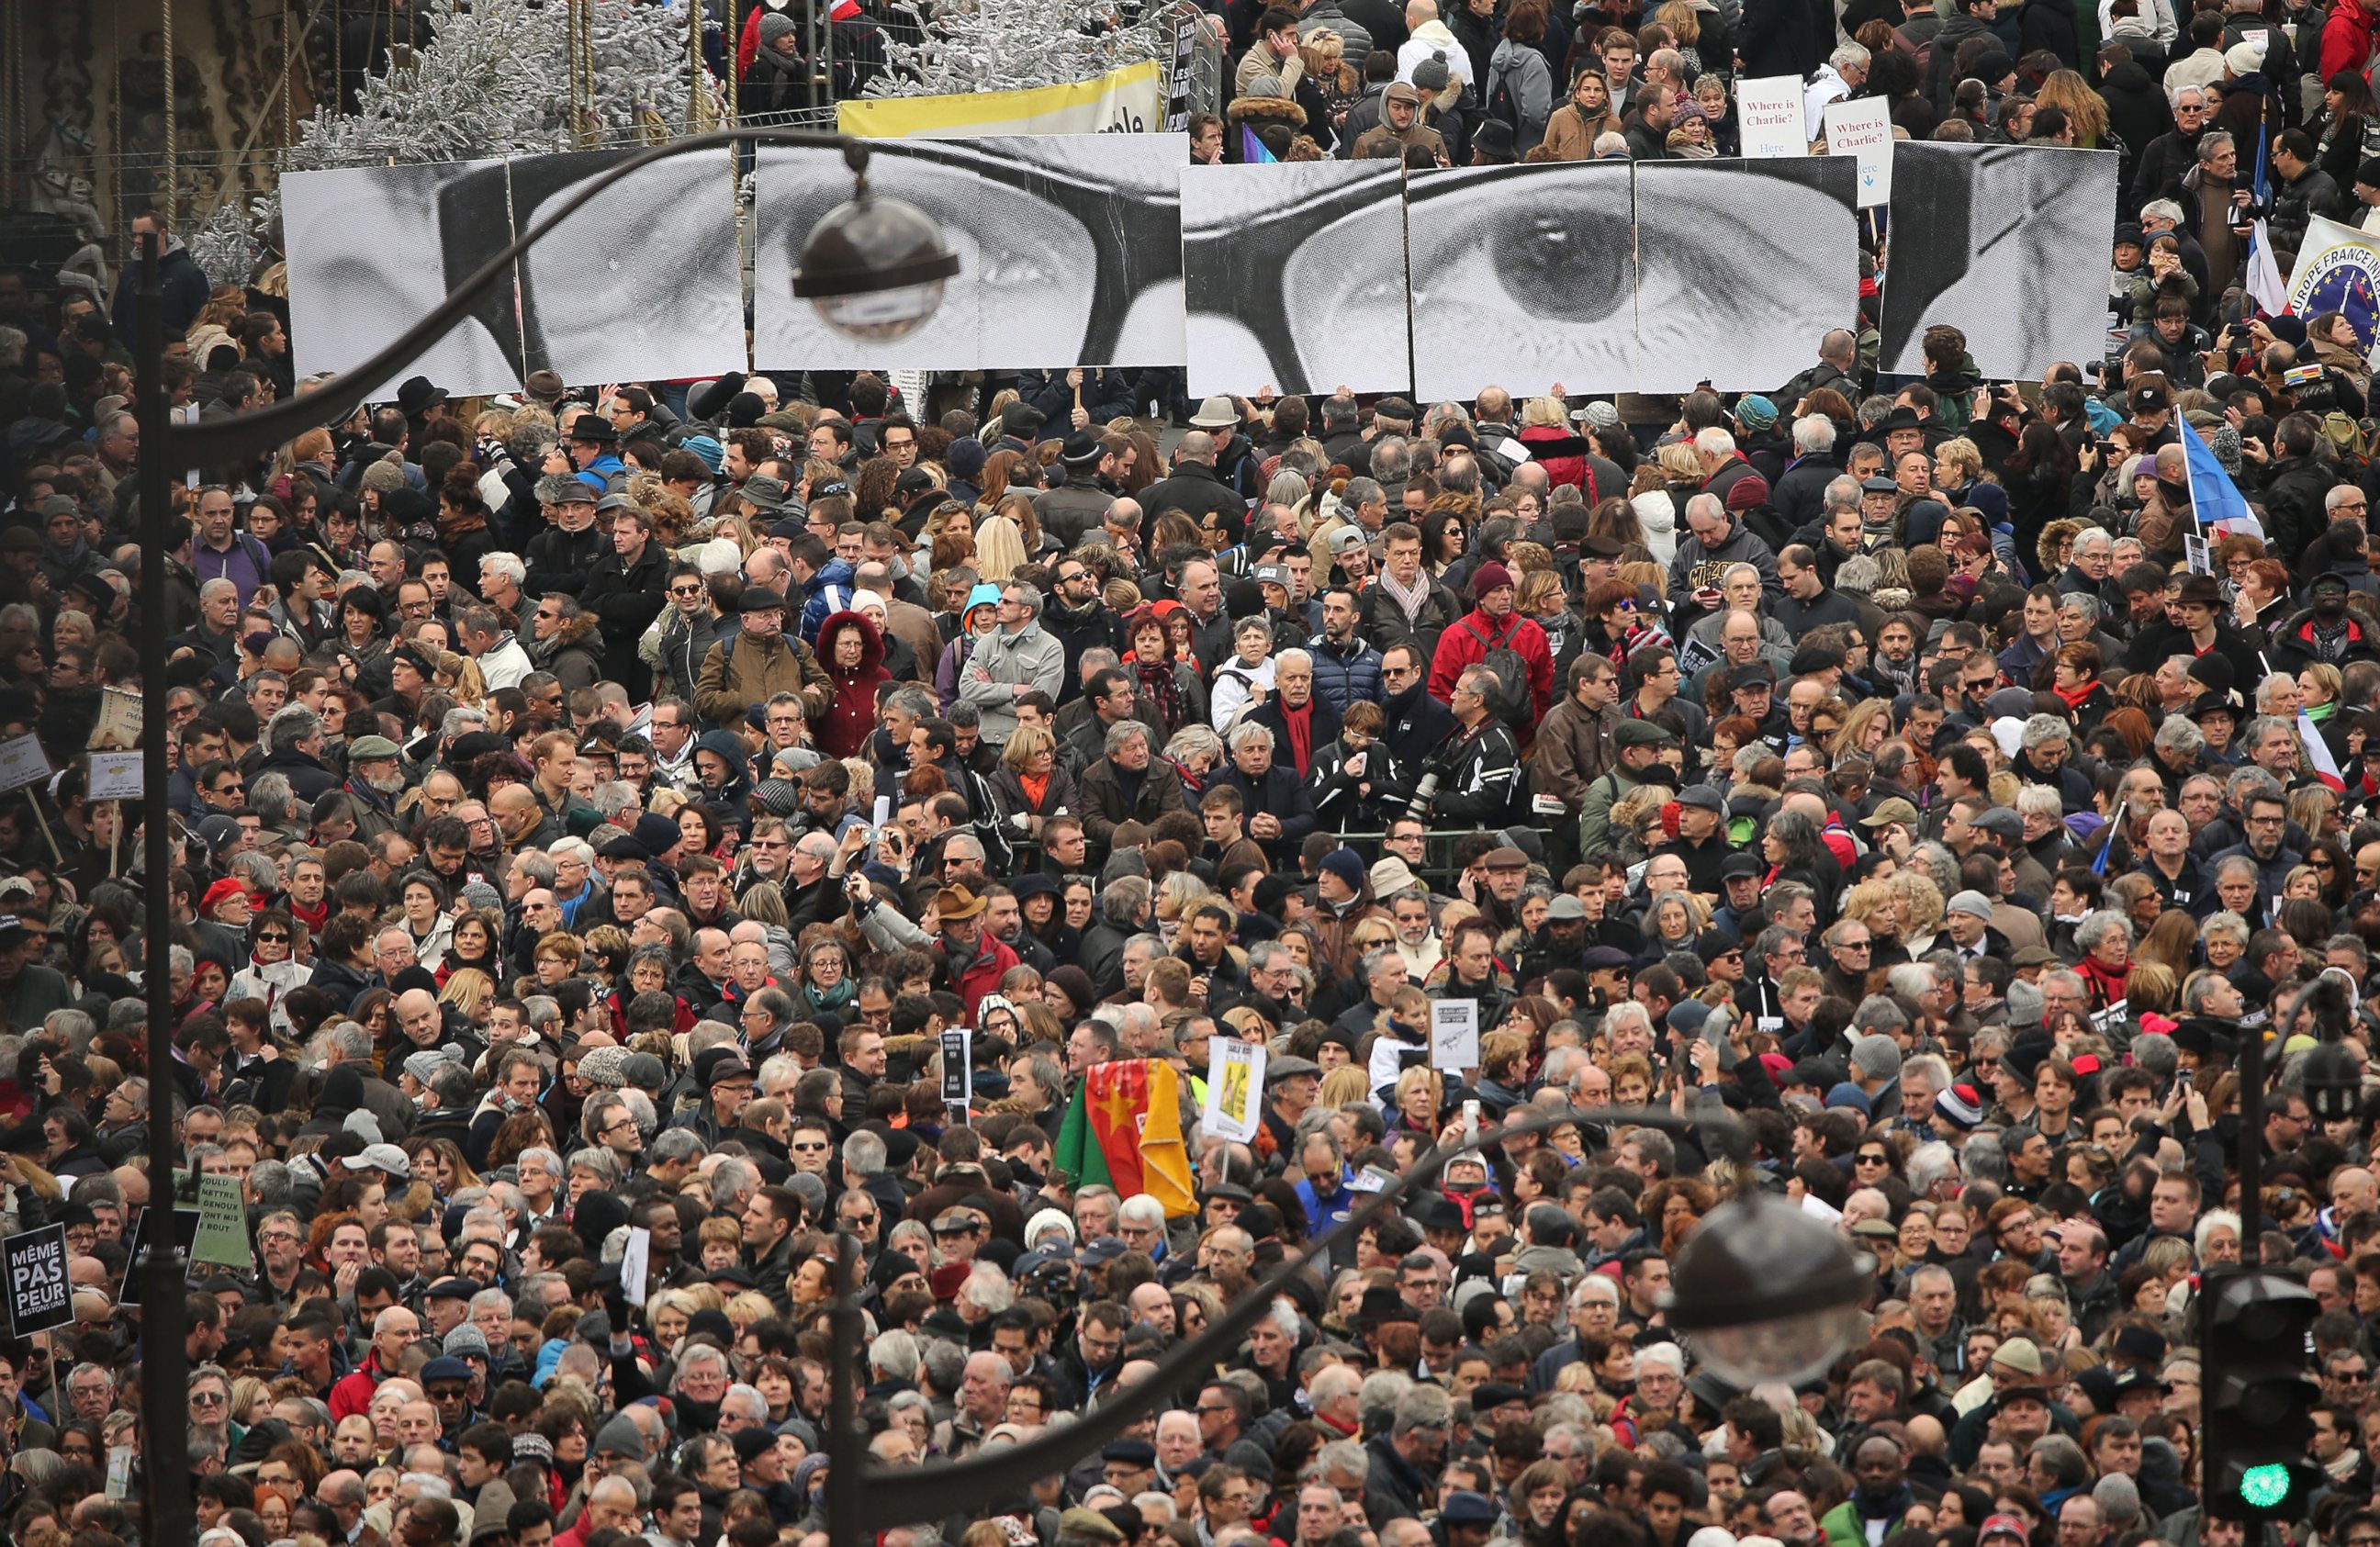 PHOTO: Demonstrators gather in Place de la Republique prior to a mass unity rally to be held in Paris following the recent terrorist attacks on Jan. 11, 2015 in Paris, France.